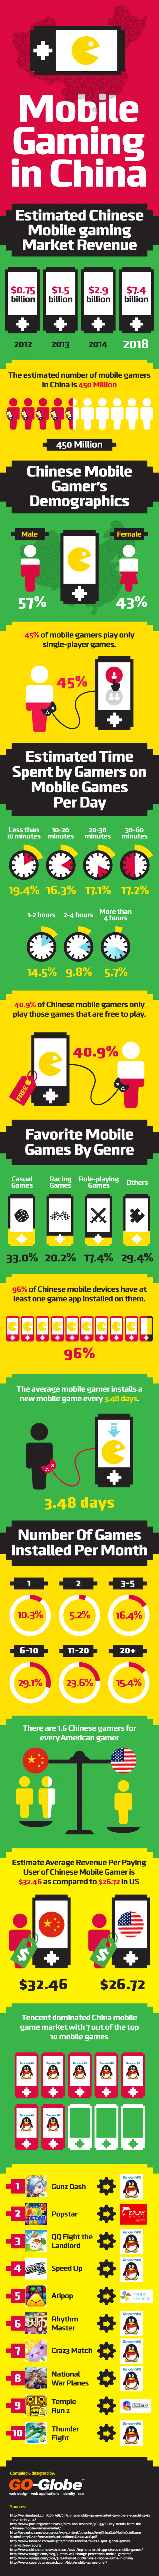 Mobile Gaming in China Statistics and Trends Infographic